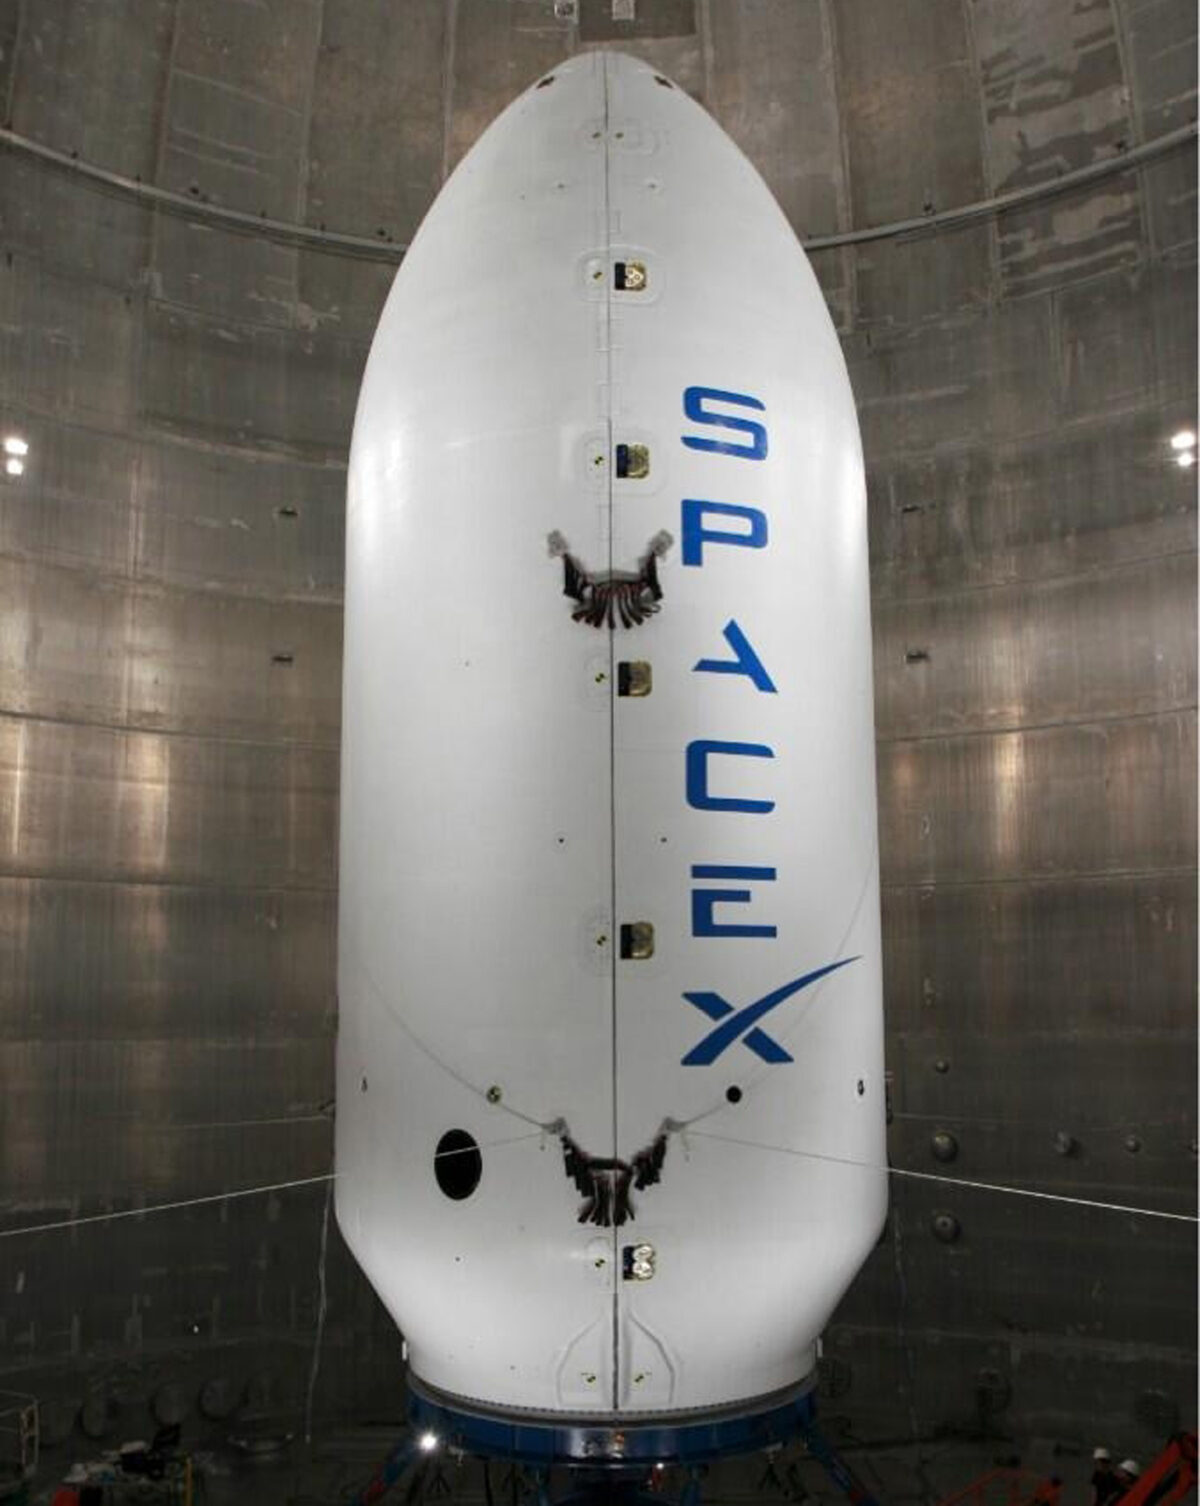 SpaceX Space Power Facility